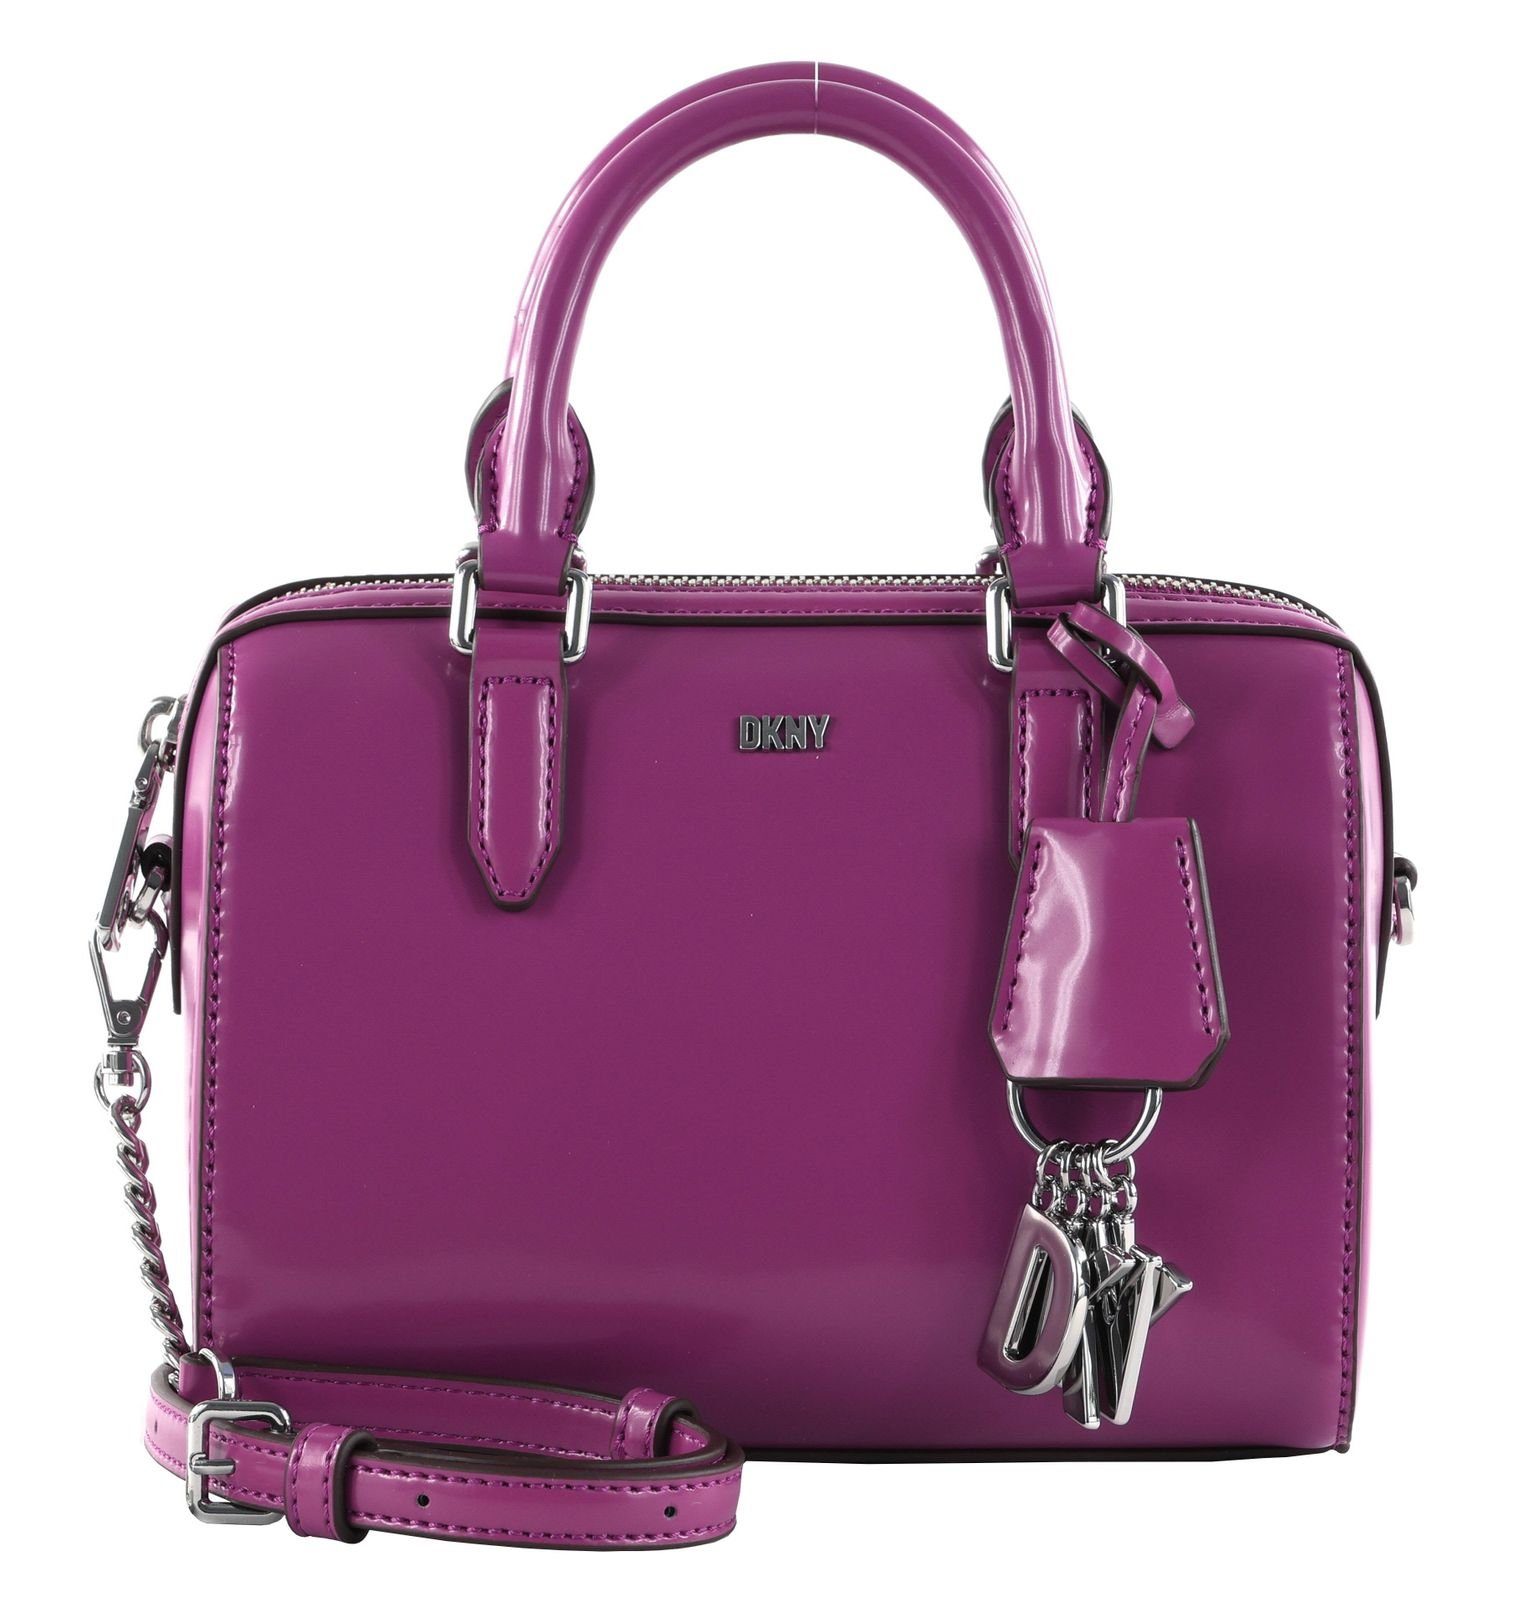 Handtasche DK Orchid DKNY Paige